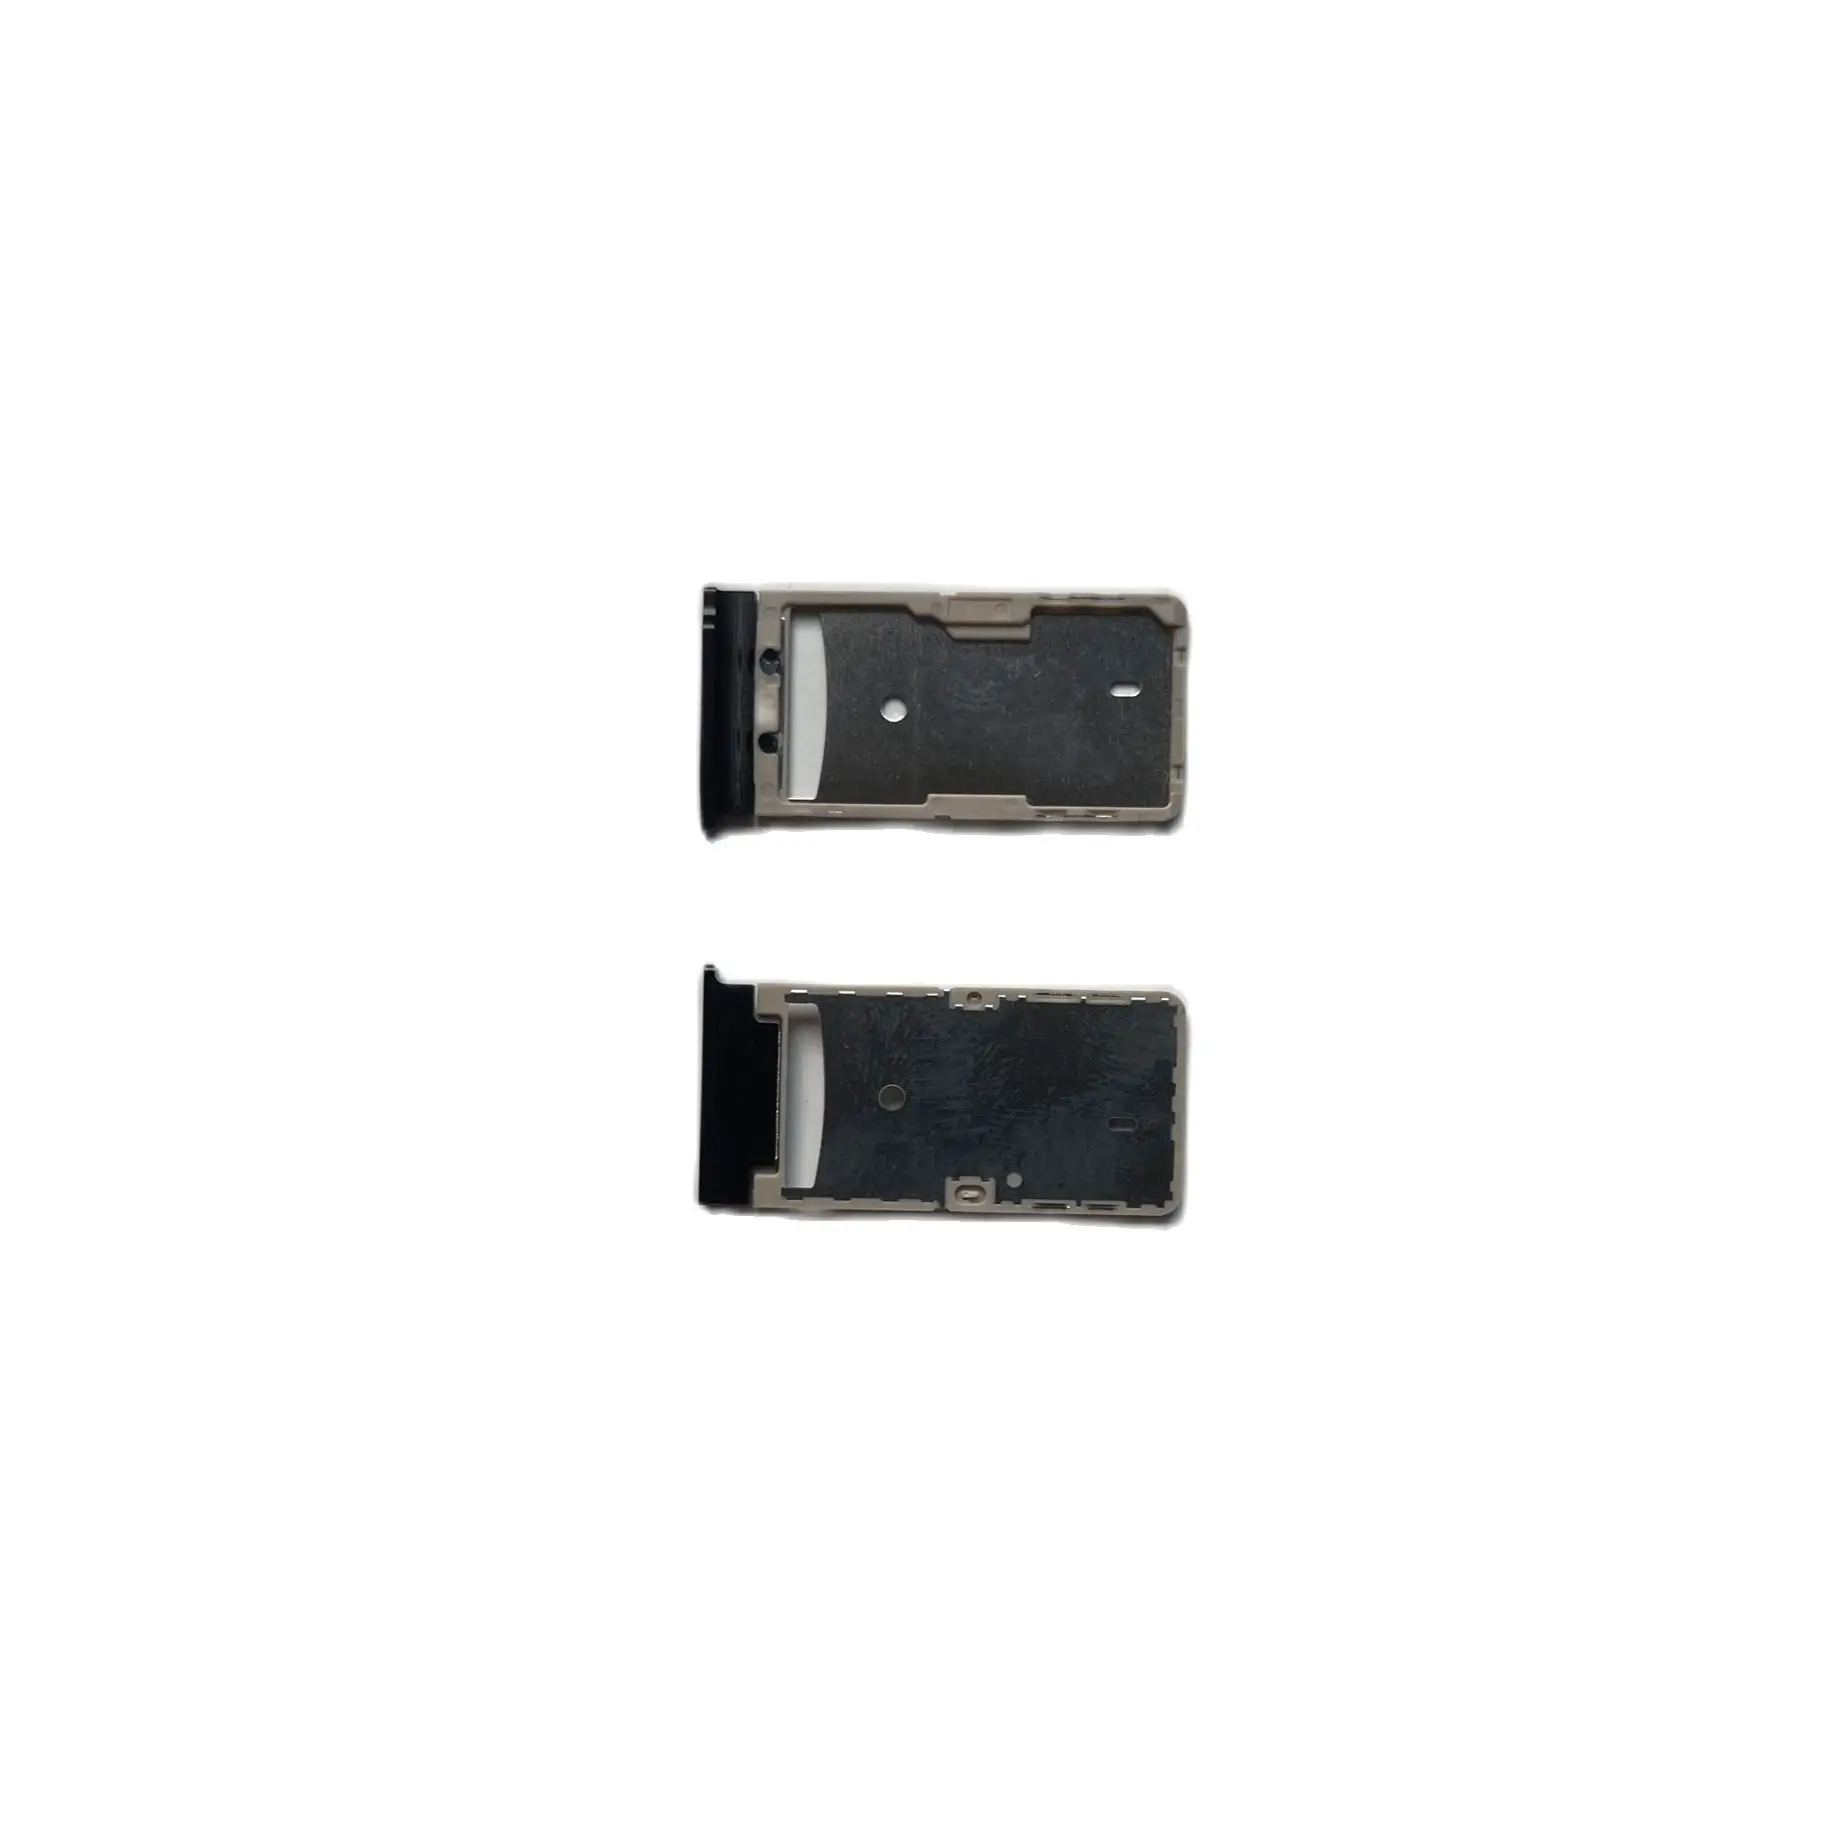 New Original For Oukitel WP18 5.93'' Cell Phone SIM Card Holder Tray Slot Replacement Part